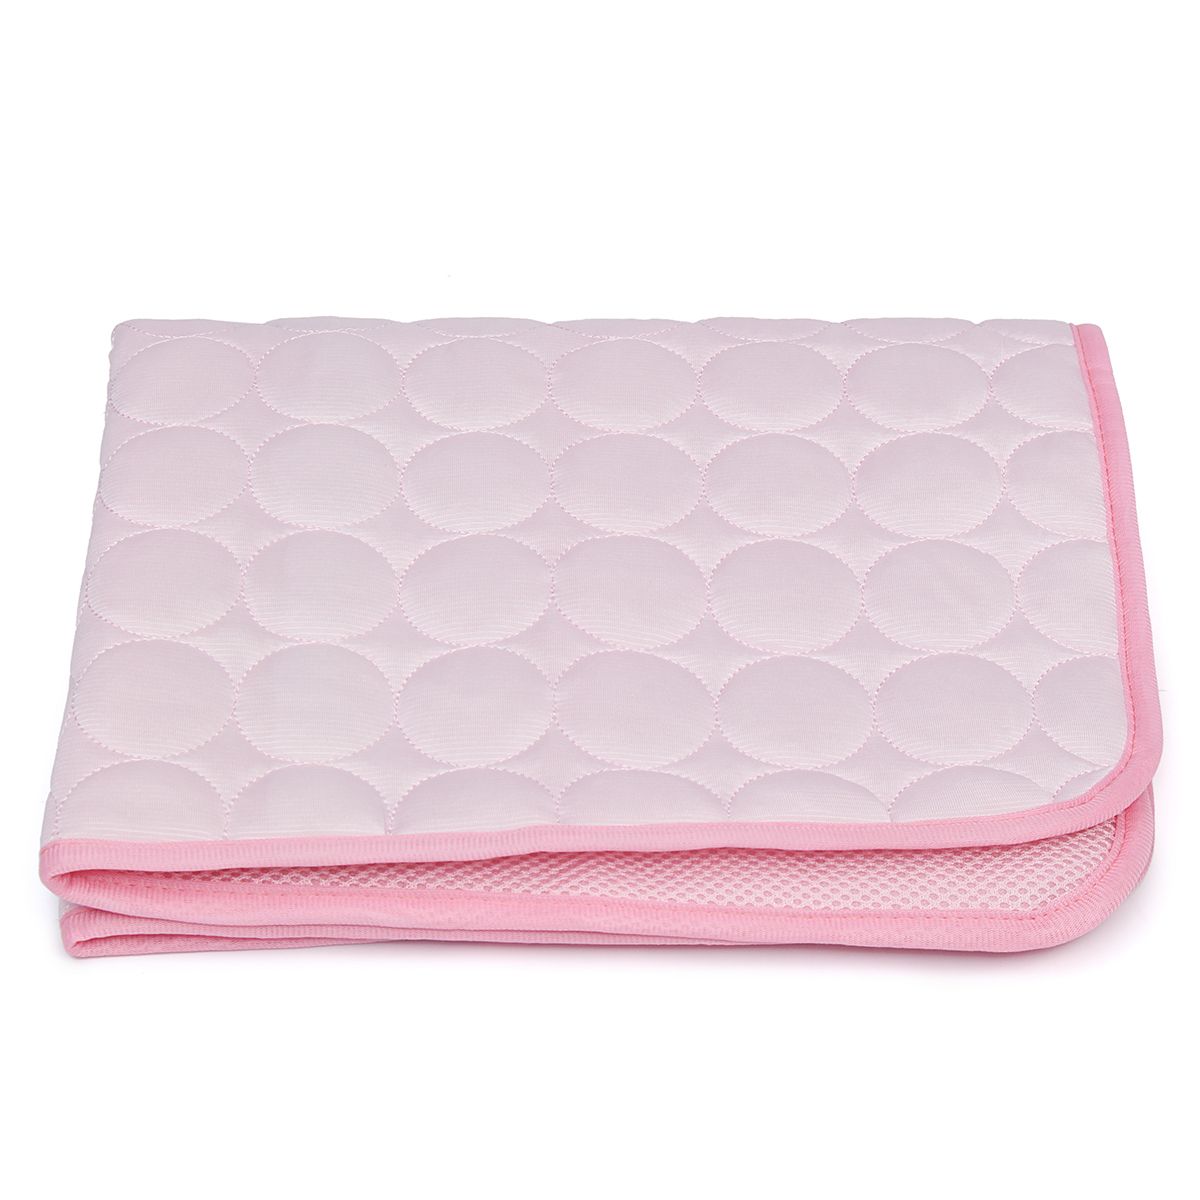 Pink-Pet-Summer-Cooling-Mat-Cold-Gel-Pad-Comfortable-Cushion-For-Dog-Cat-Puppy-Decorations-1543407